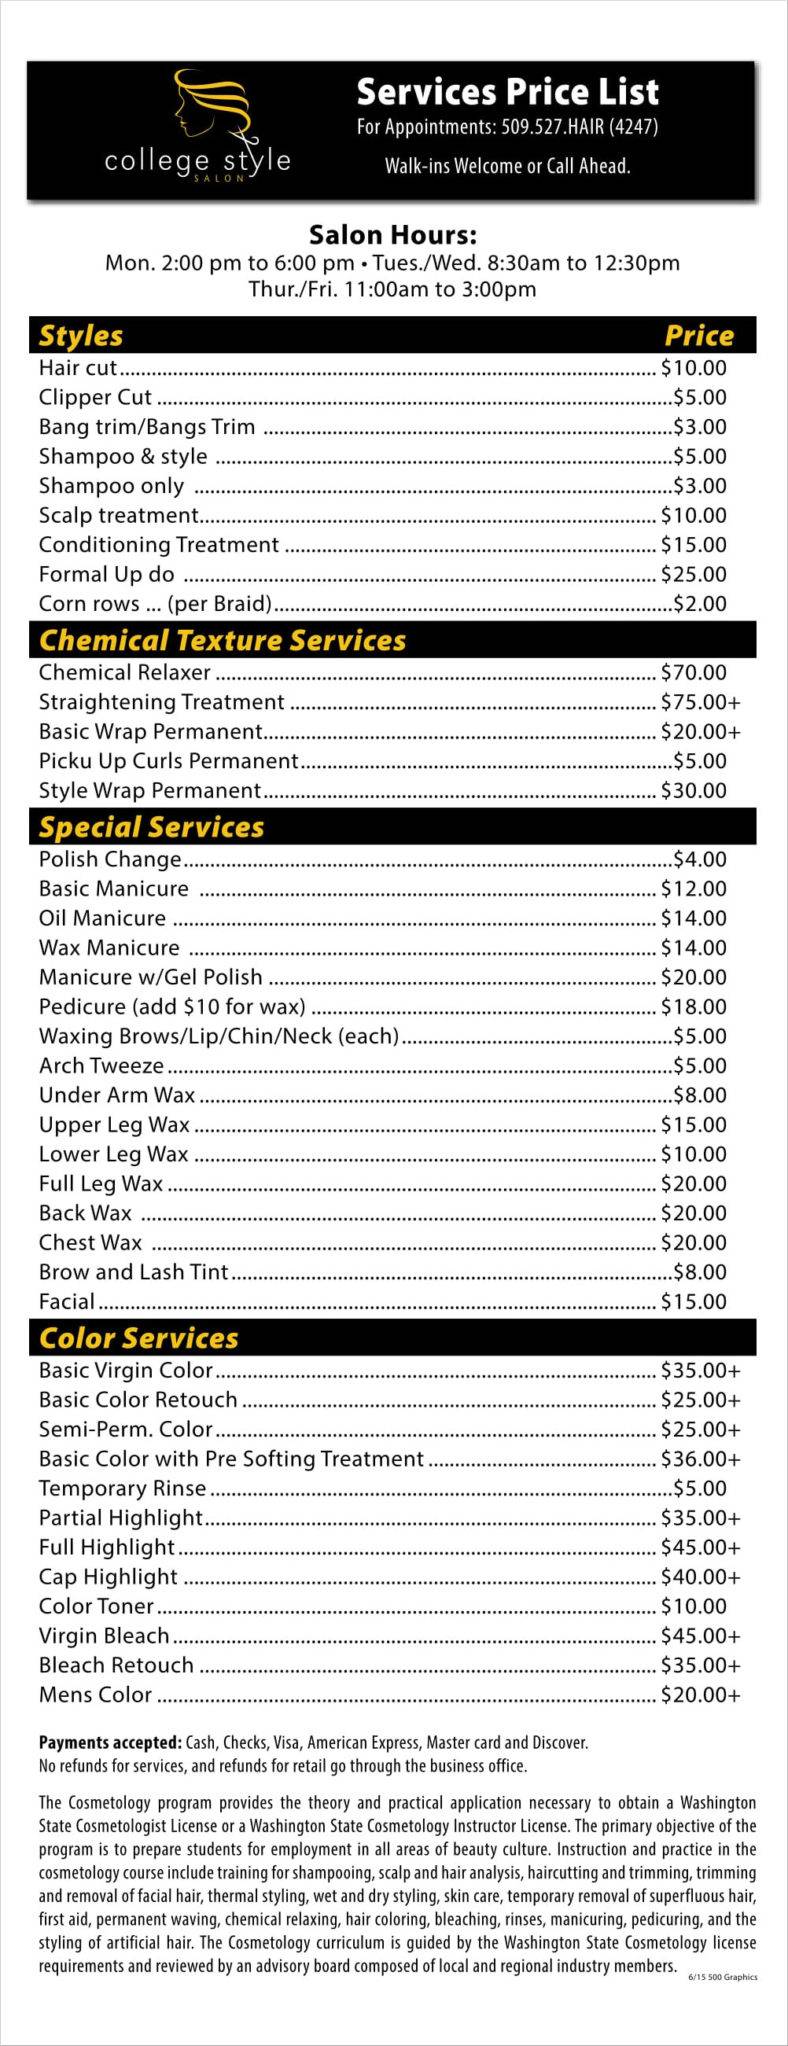 services and prices 11 788x2046